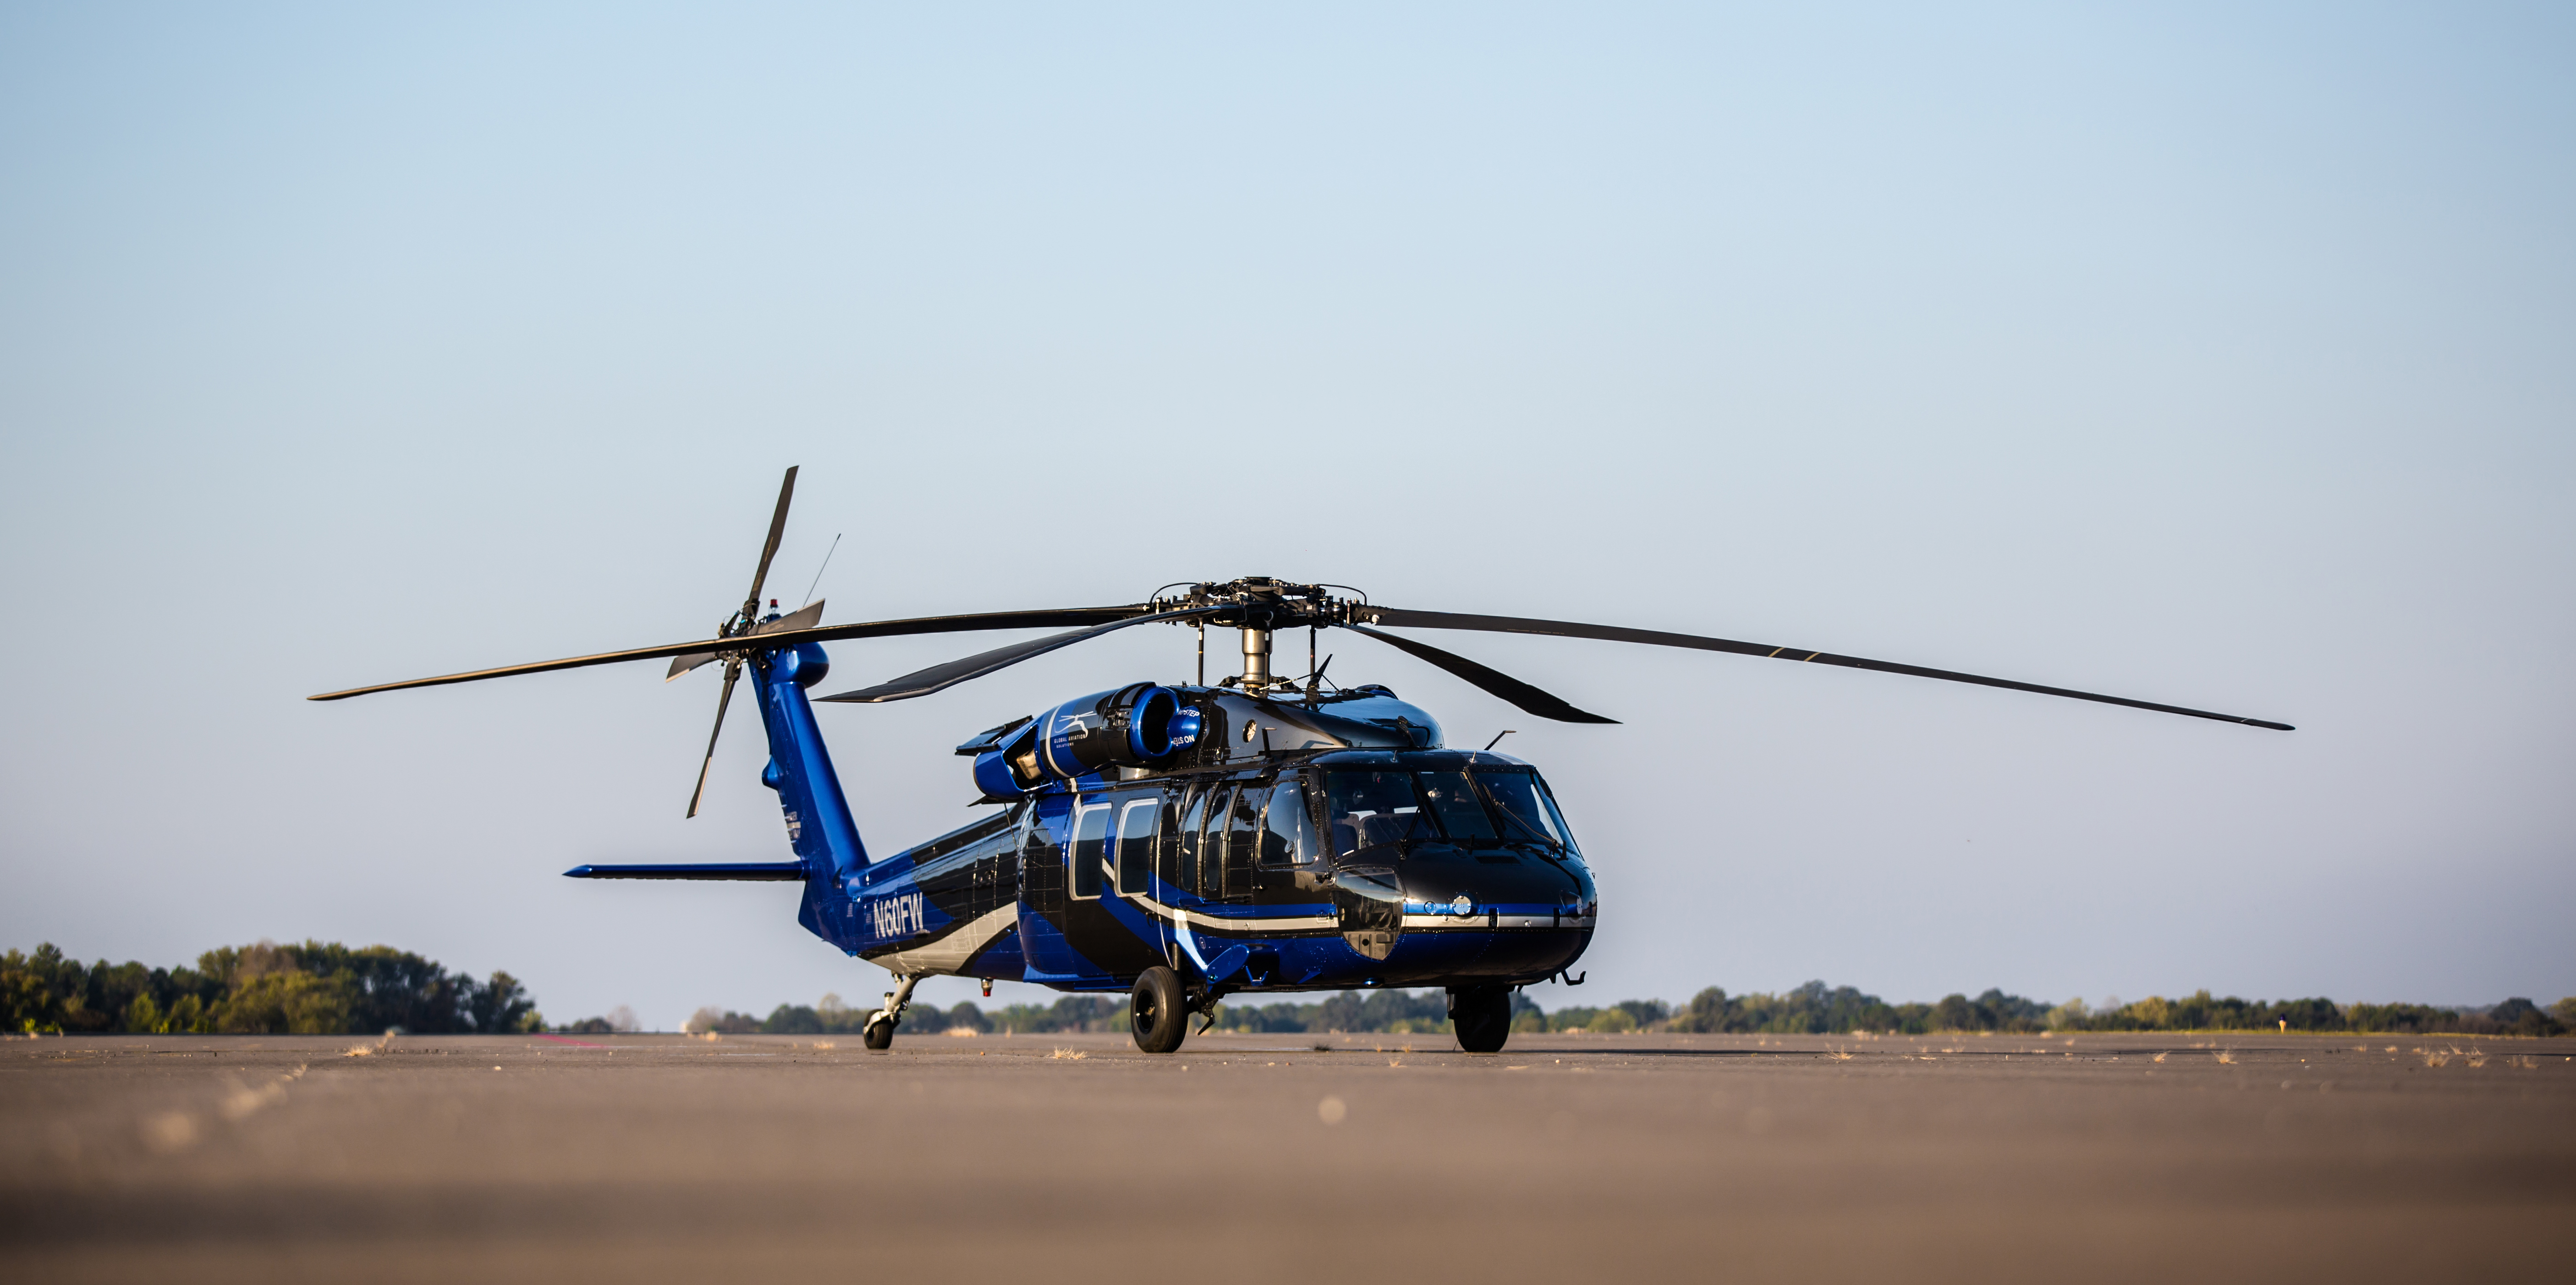 G5000h Upgrade Program Introduced For Black Hawk Helicopters